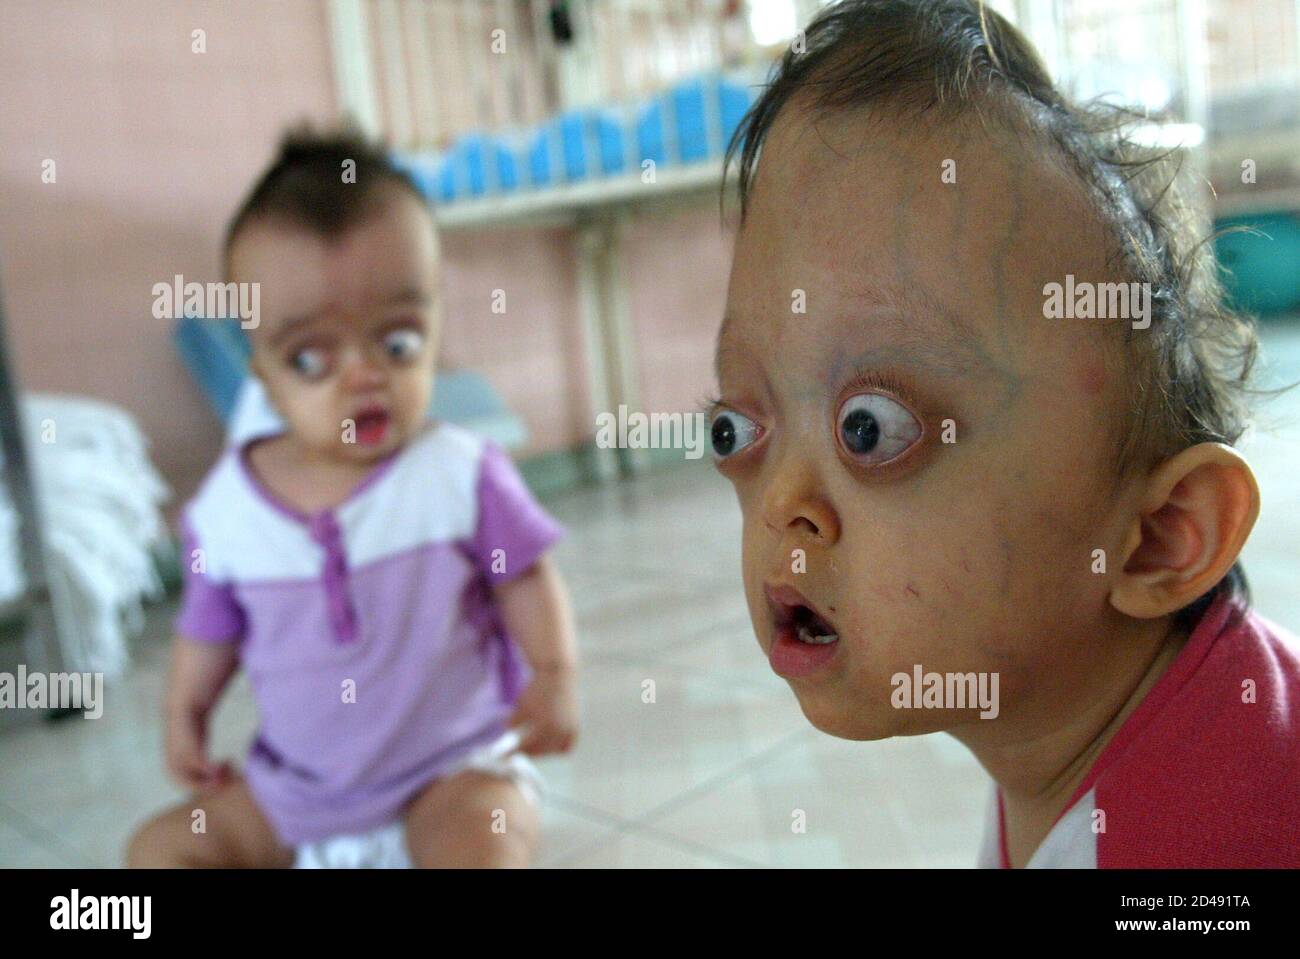 Children Born With Deformities Sit In The Peace Village At Tu Du Hopsital In Ho Chi Minh City February 3 04 The Hospital S Chef De Service Doctor Ng Thi Phuong Tan Suspects